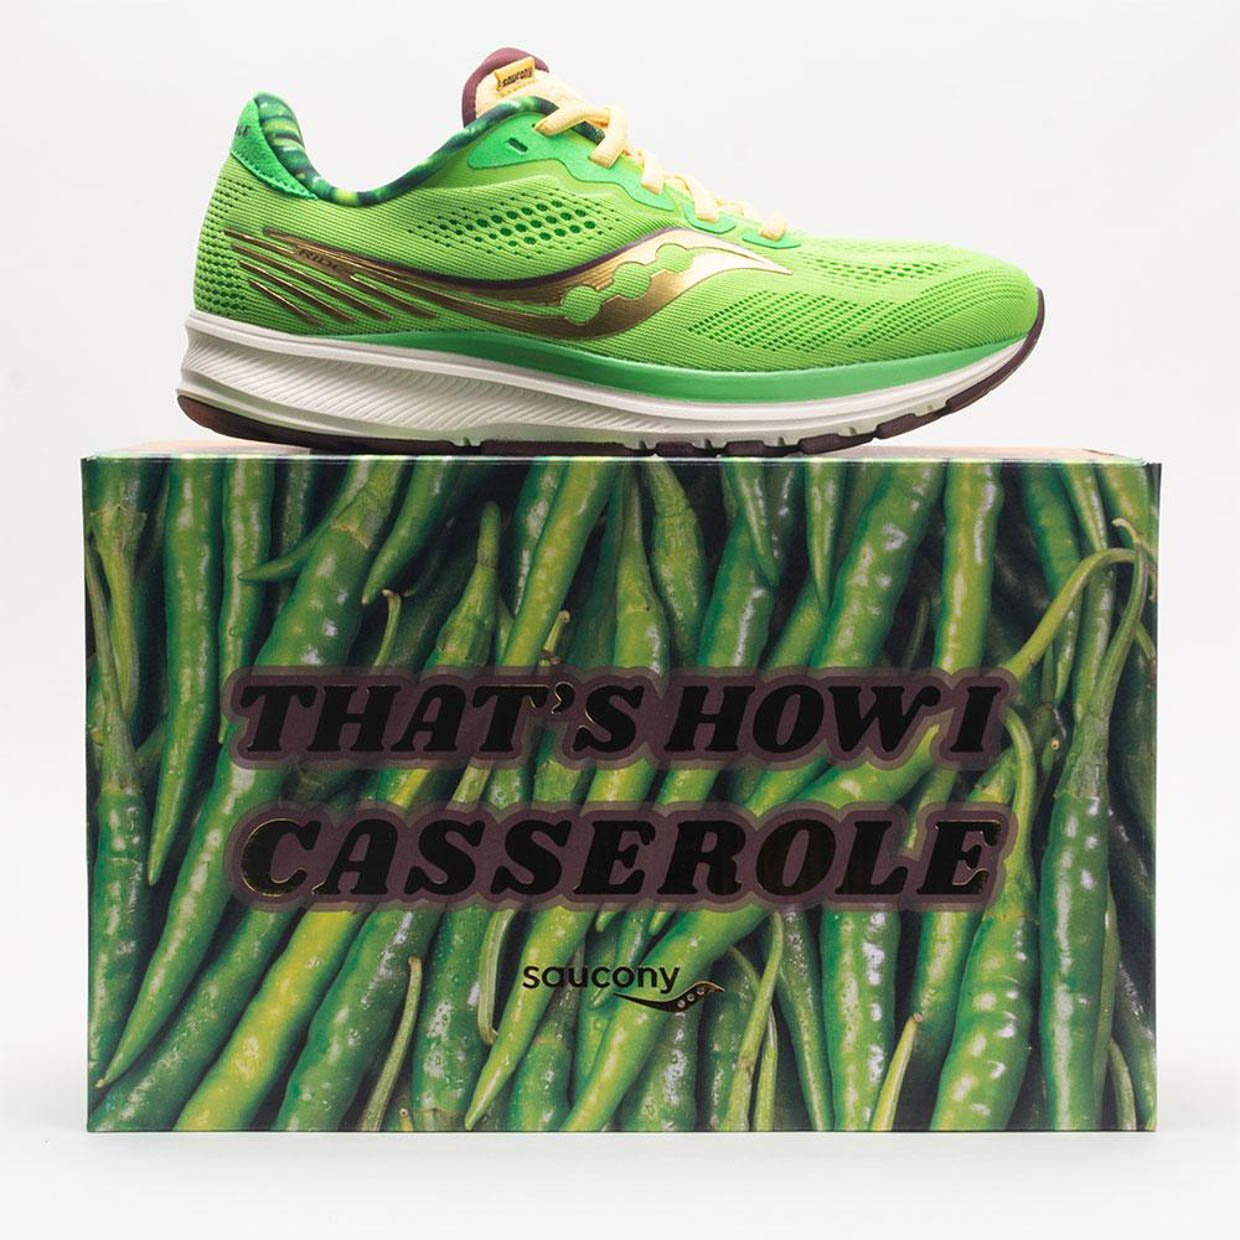 Saucony Ride 14 Pick-a-Side Running Shoes